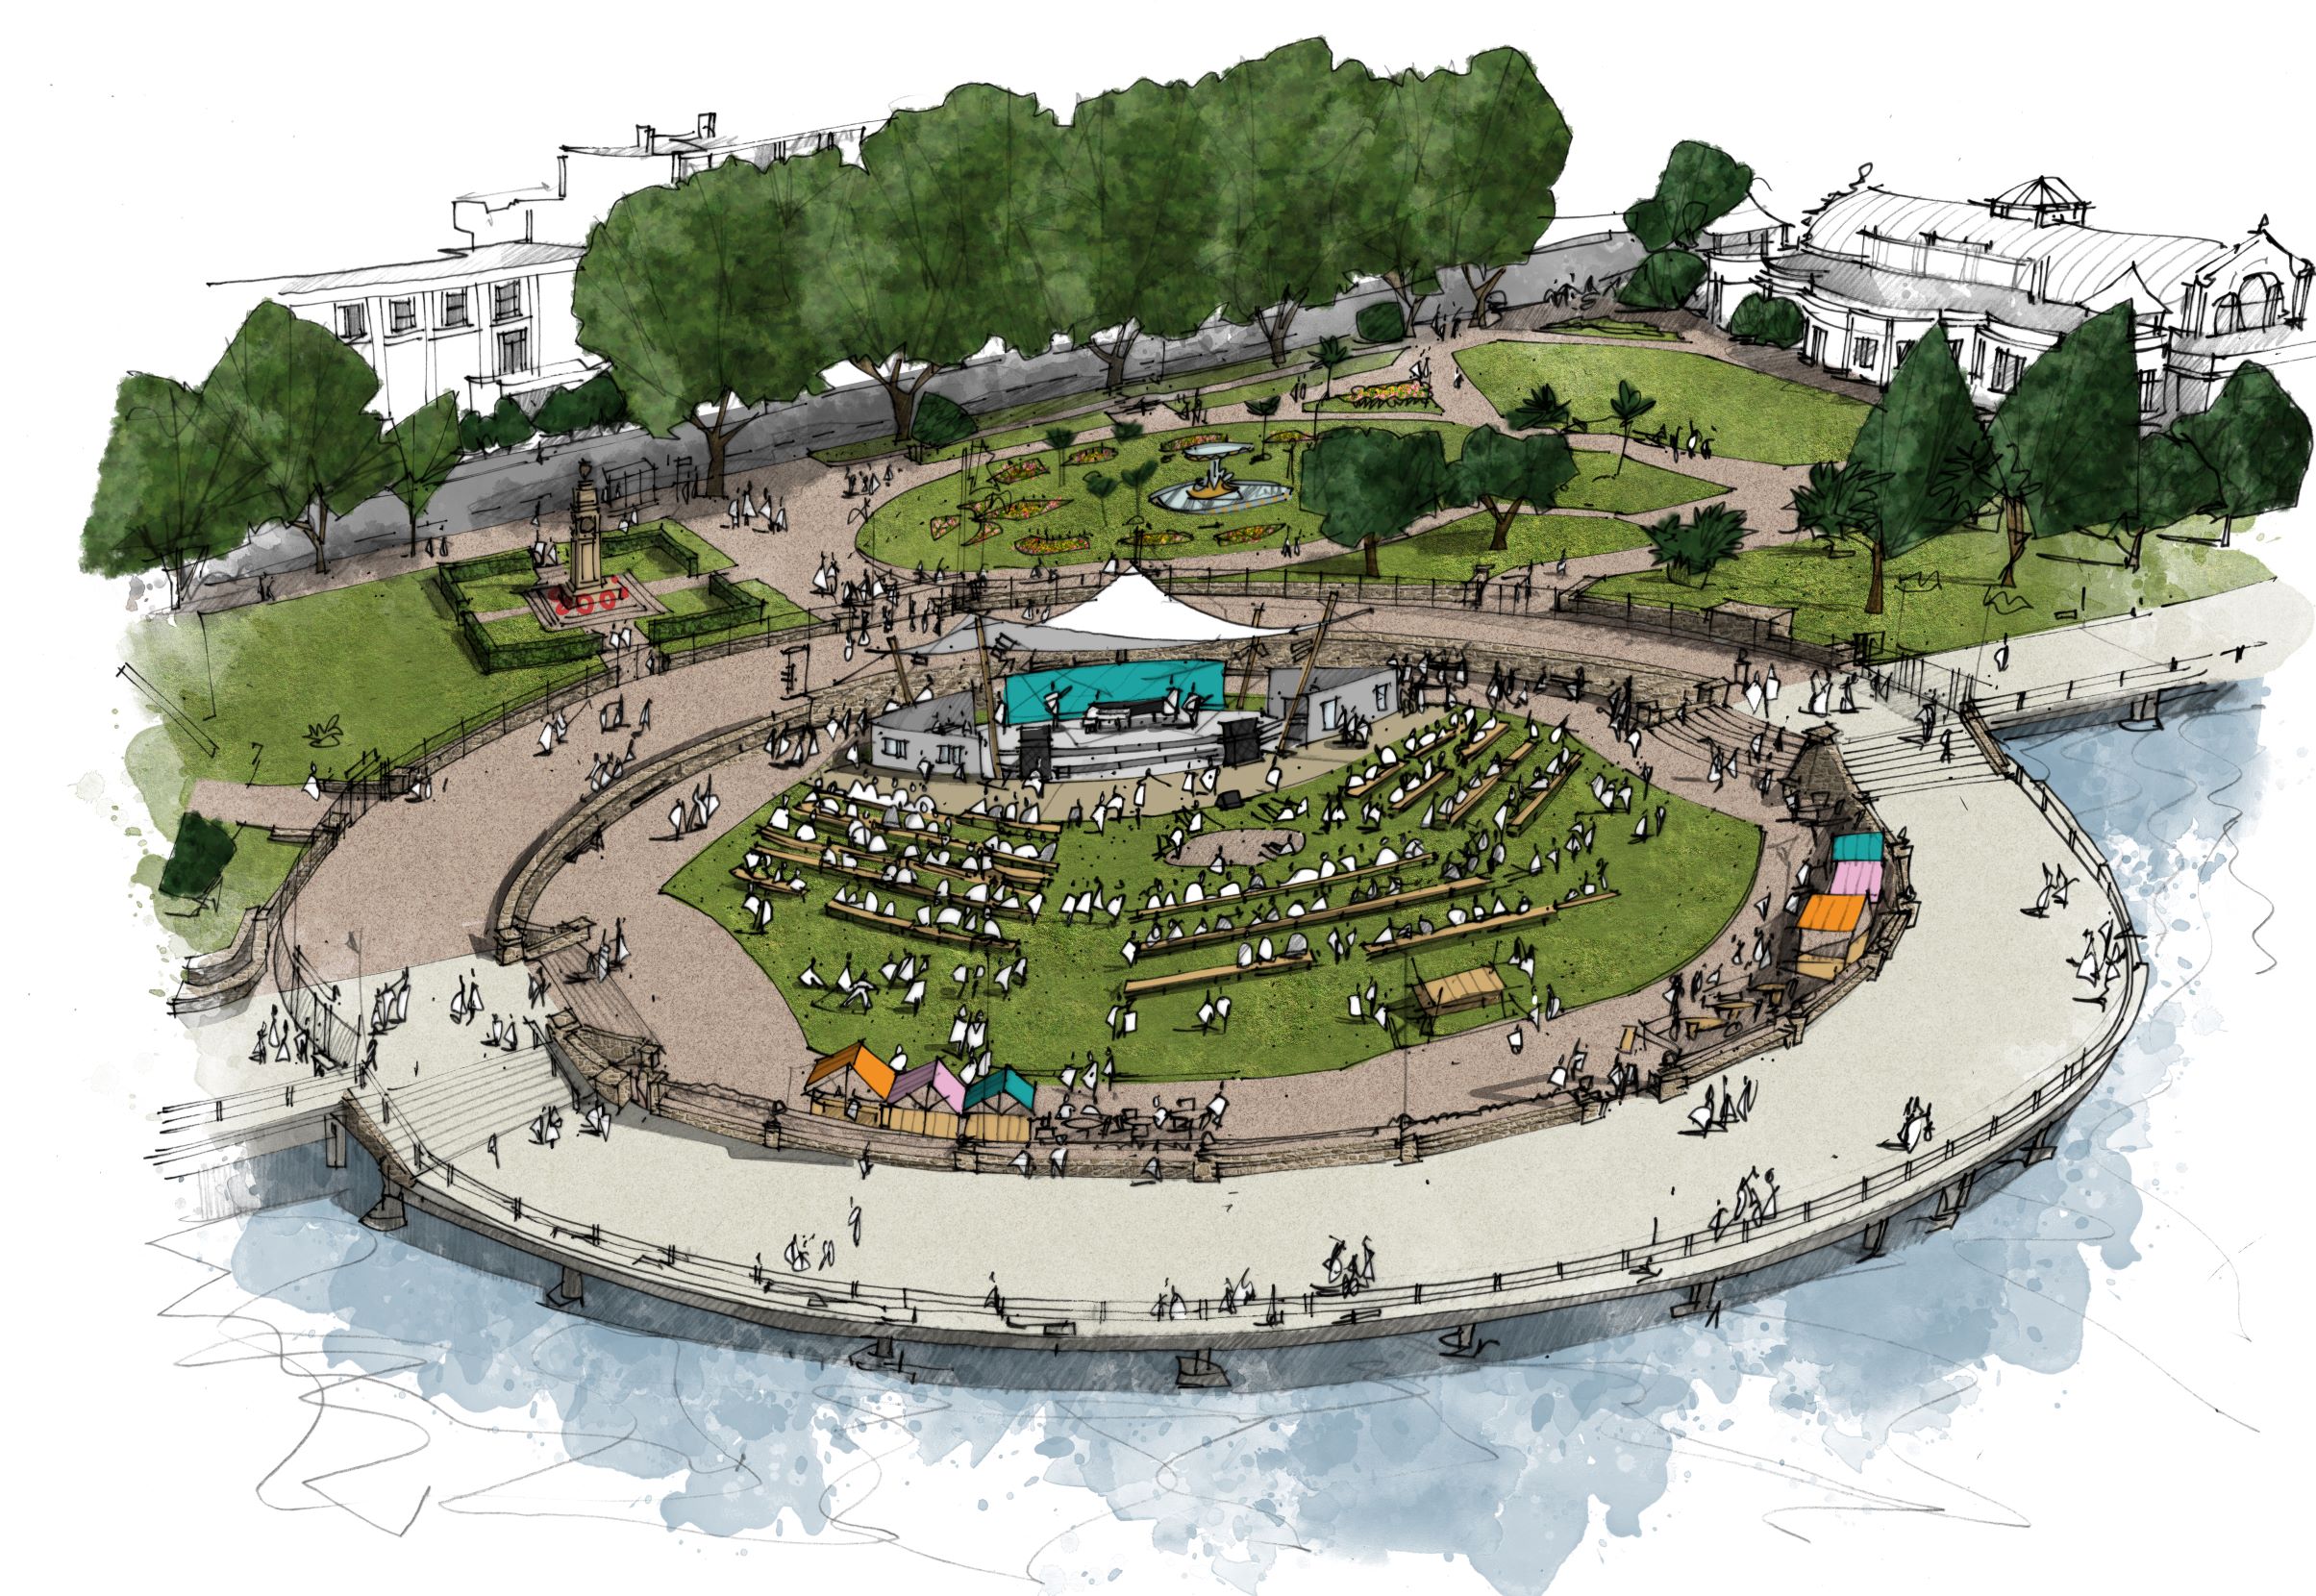 Artist impression of what the event space at Princess Gardens could look like